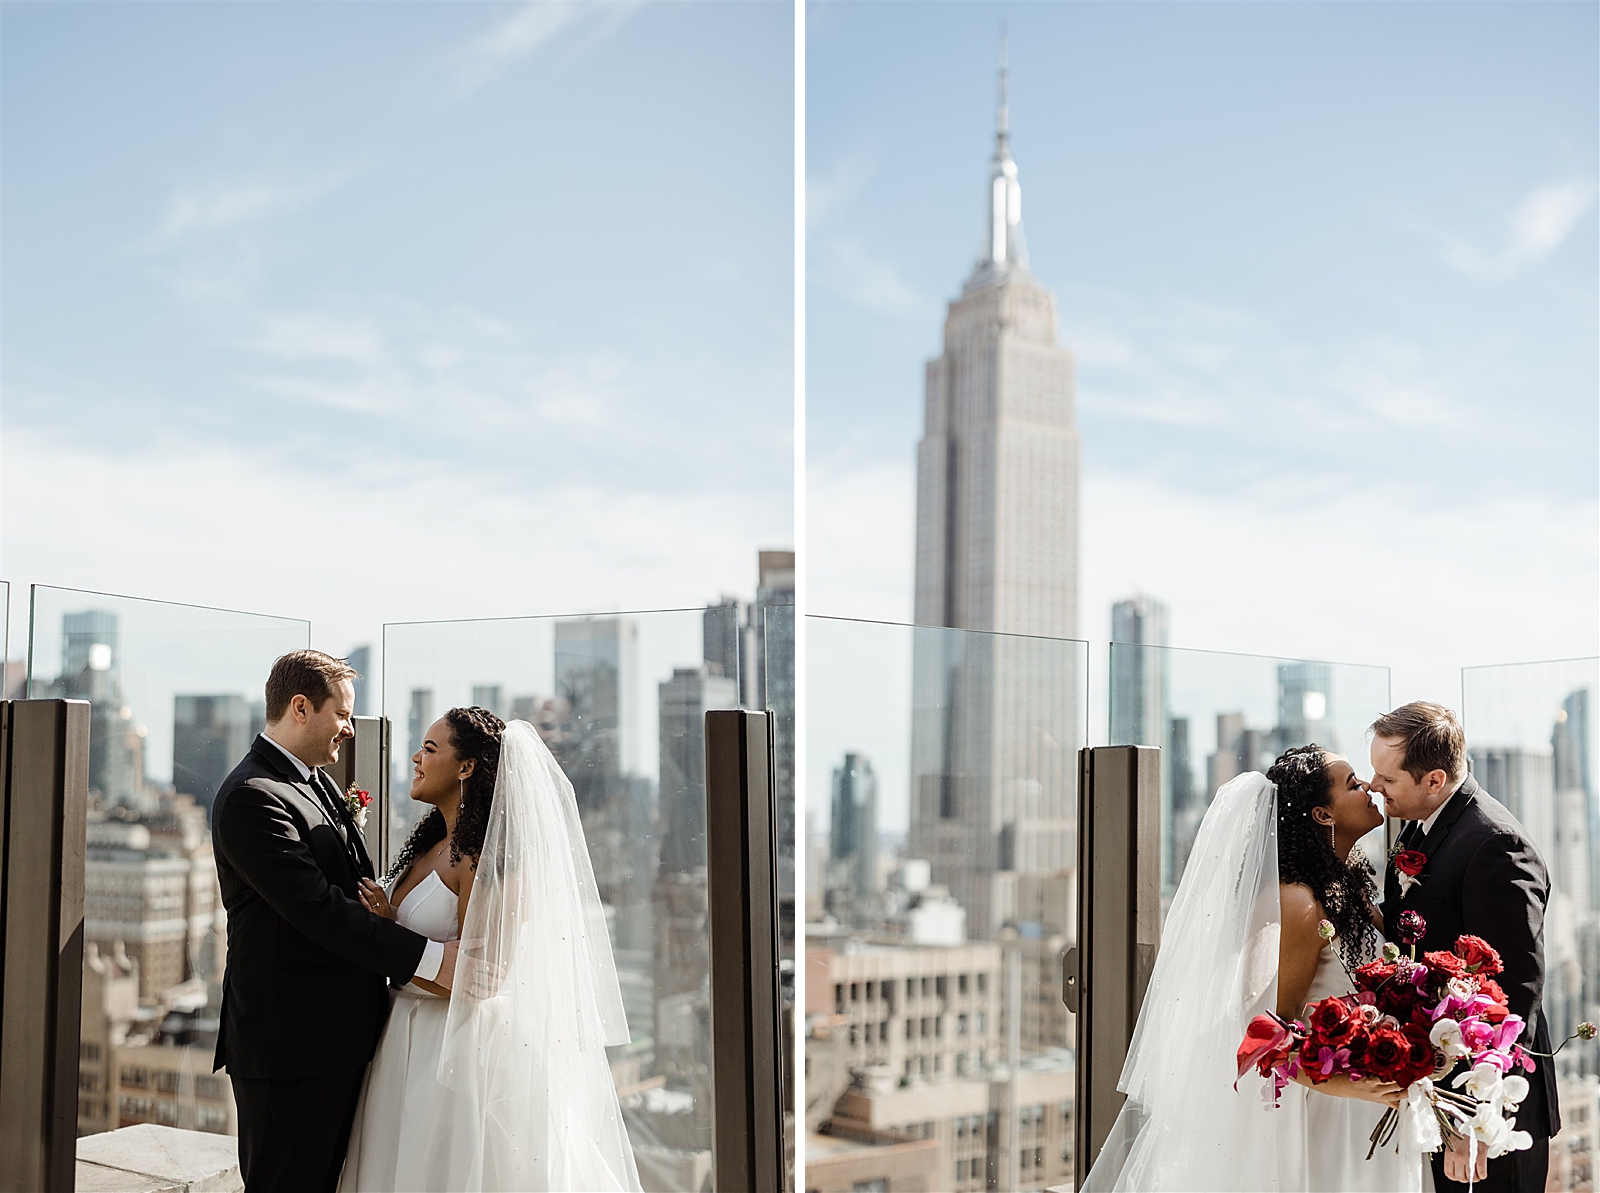 Left photo: Bride and Groom are all smiles as they embrace on top of the Skylark.
Right photo: Bride and Groom lean in for a kiss on top of the Skylark as the Empire State Building stuns in the background.